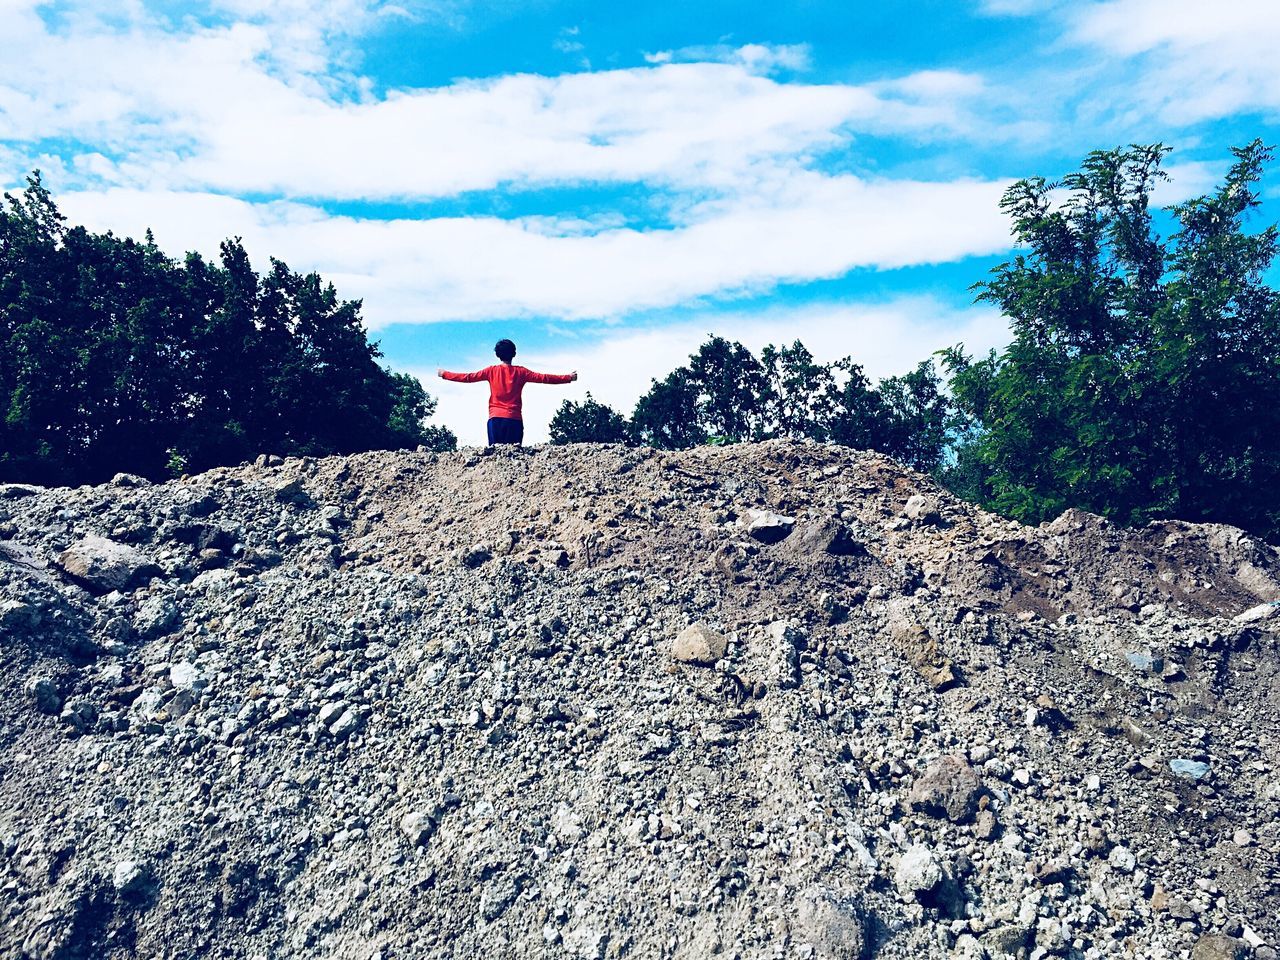 real people, sky, one person, cloud - sky, lifestyles, tree, nature, day, rear view, plant, rock, solid, leisure activity, rock - object, standing, beauty in nature, land, scenics - nature, outdoors